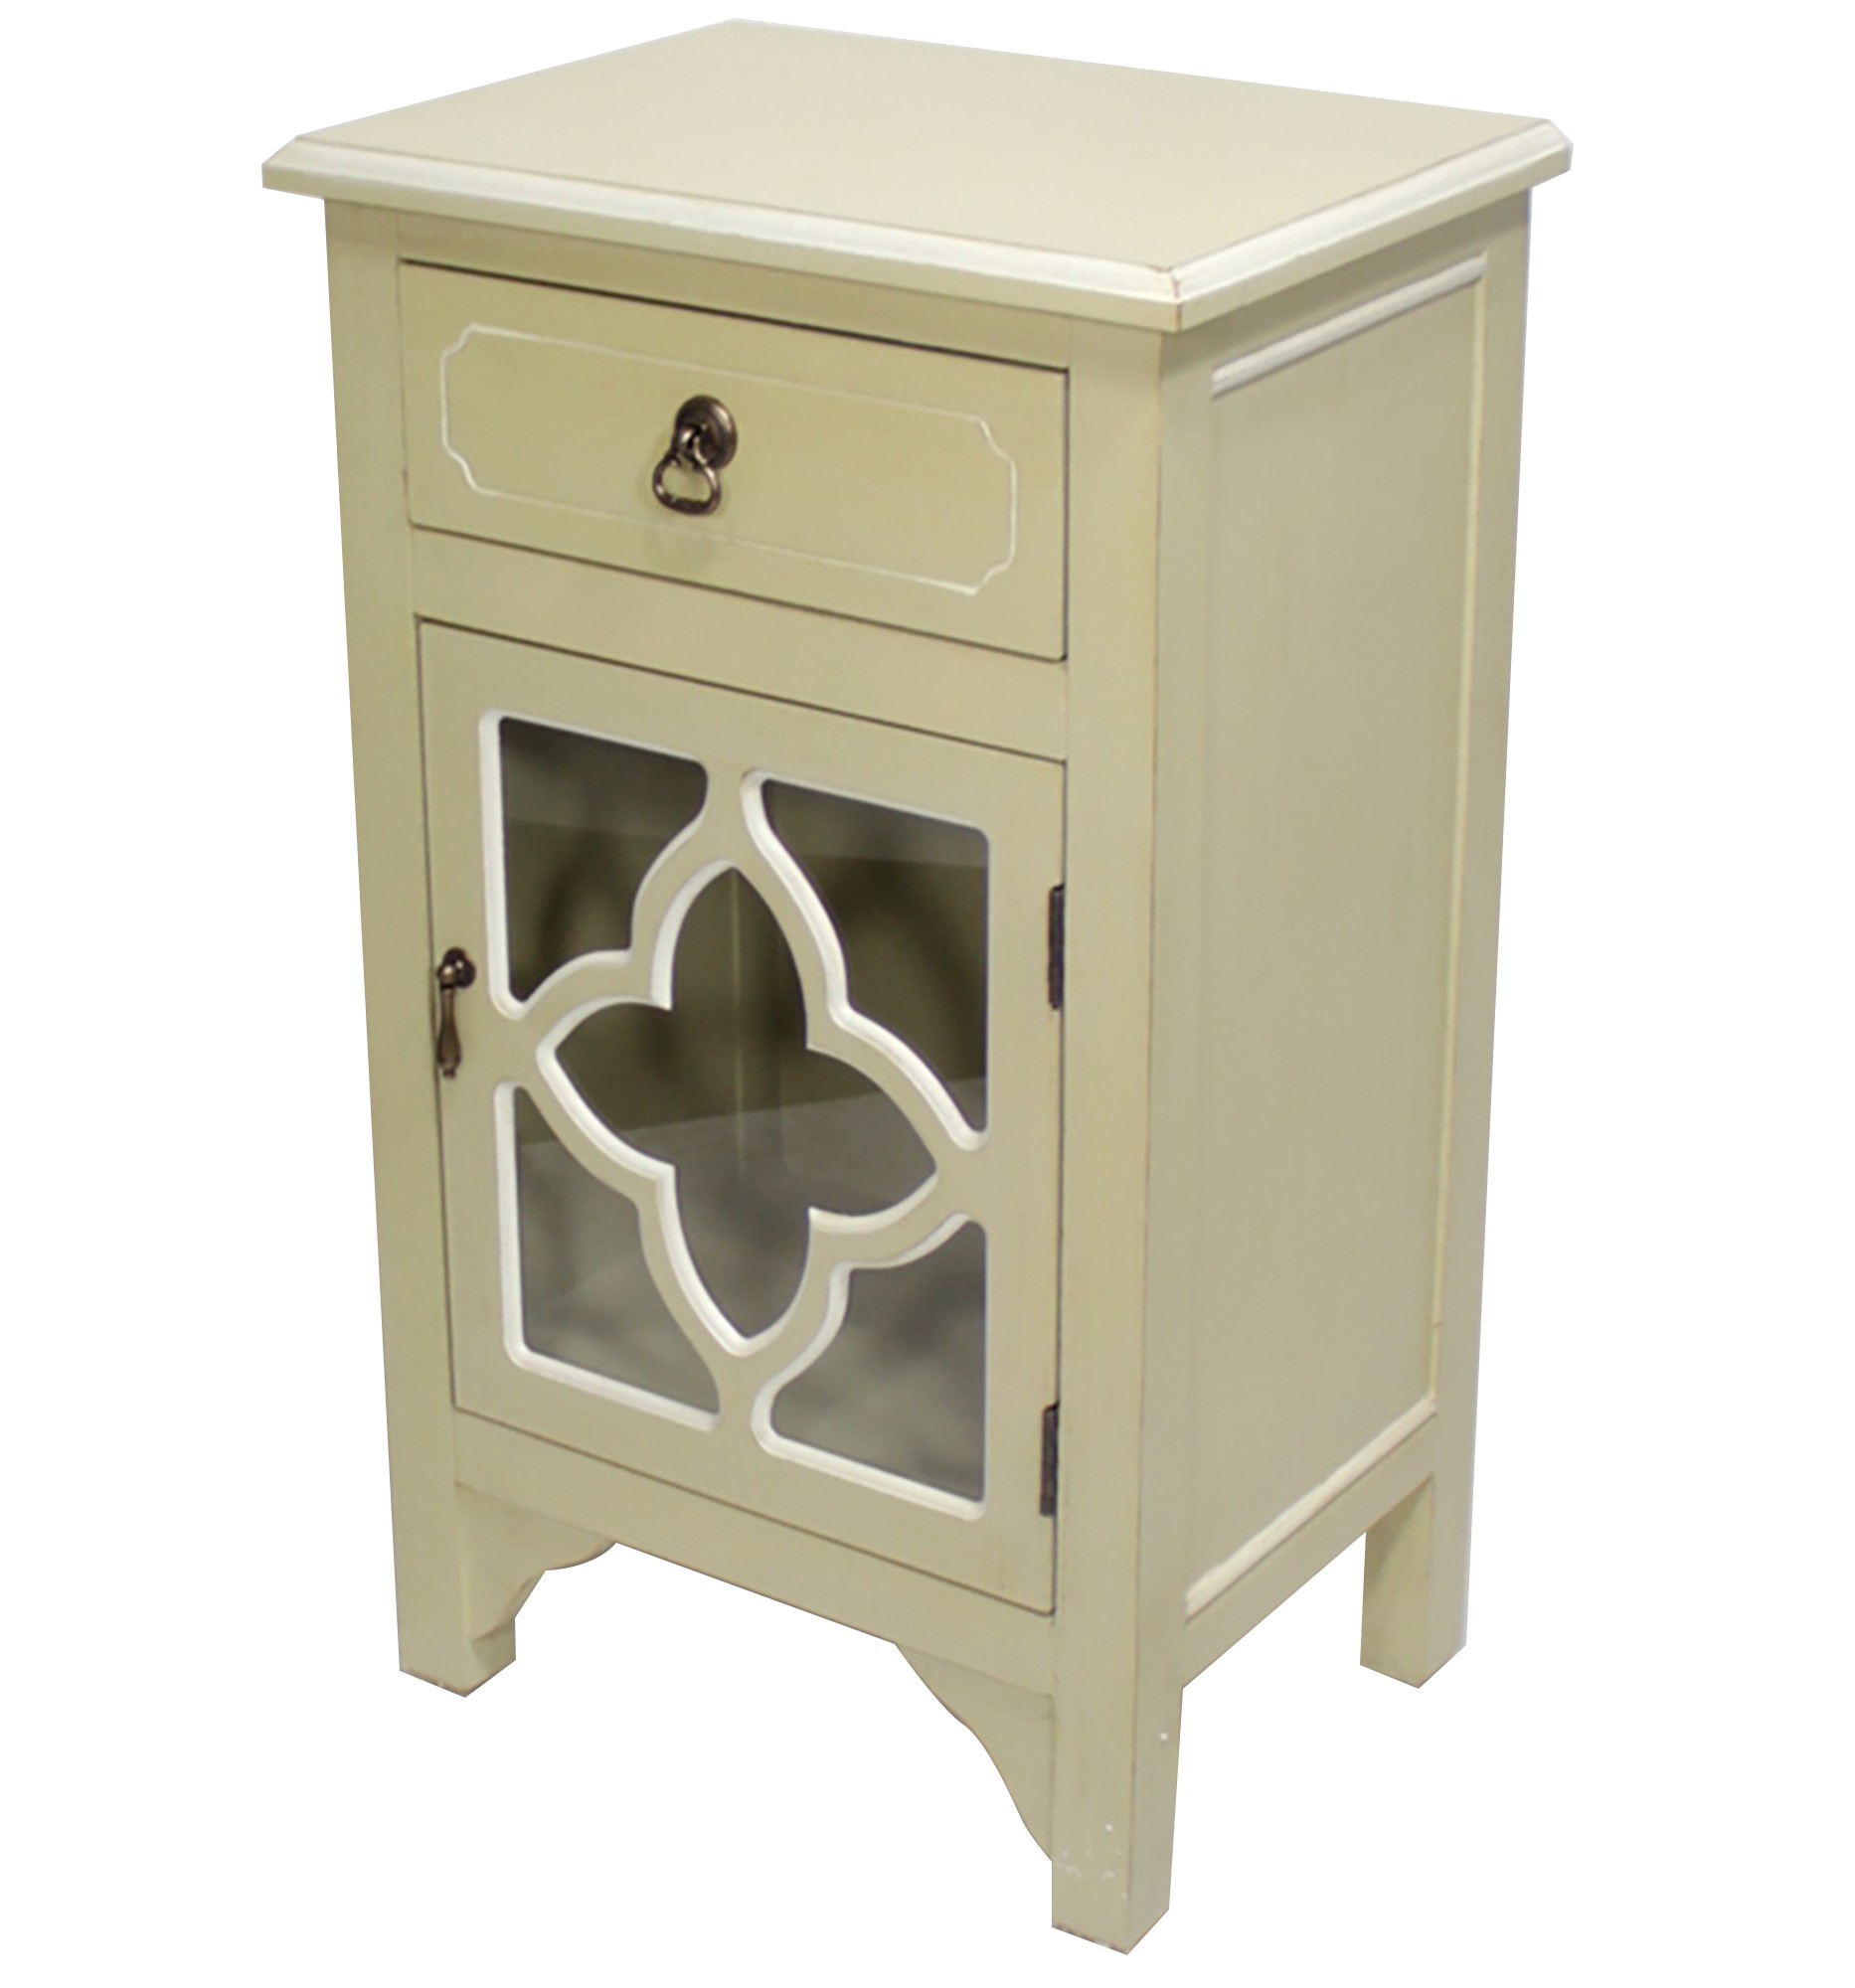 18" X 13" X 30" Beige MDF Wood Clear Glass Accent Cabinet with a Drawer and Door and Quatrefoil Inserts